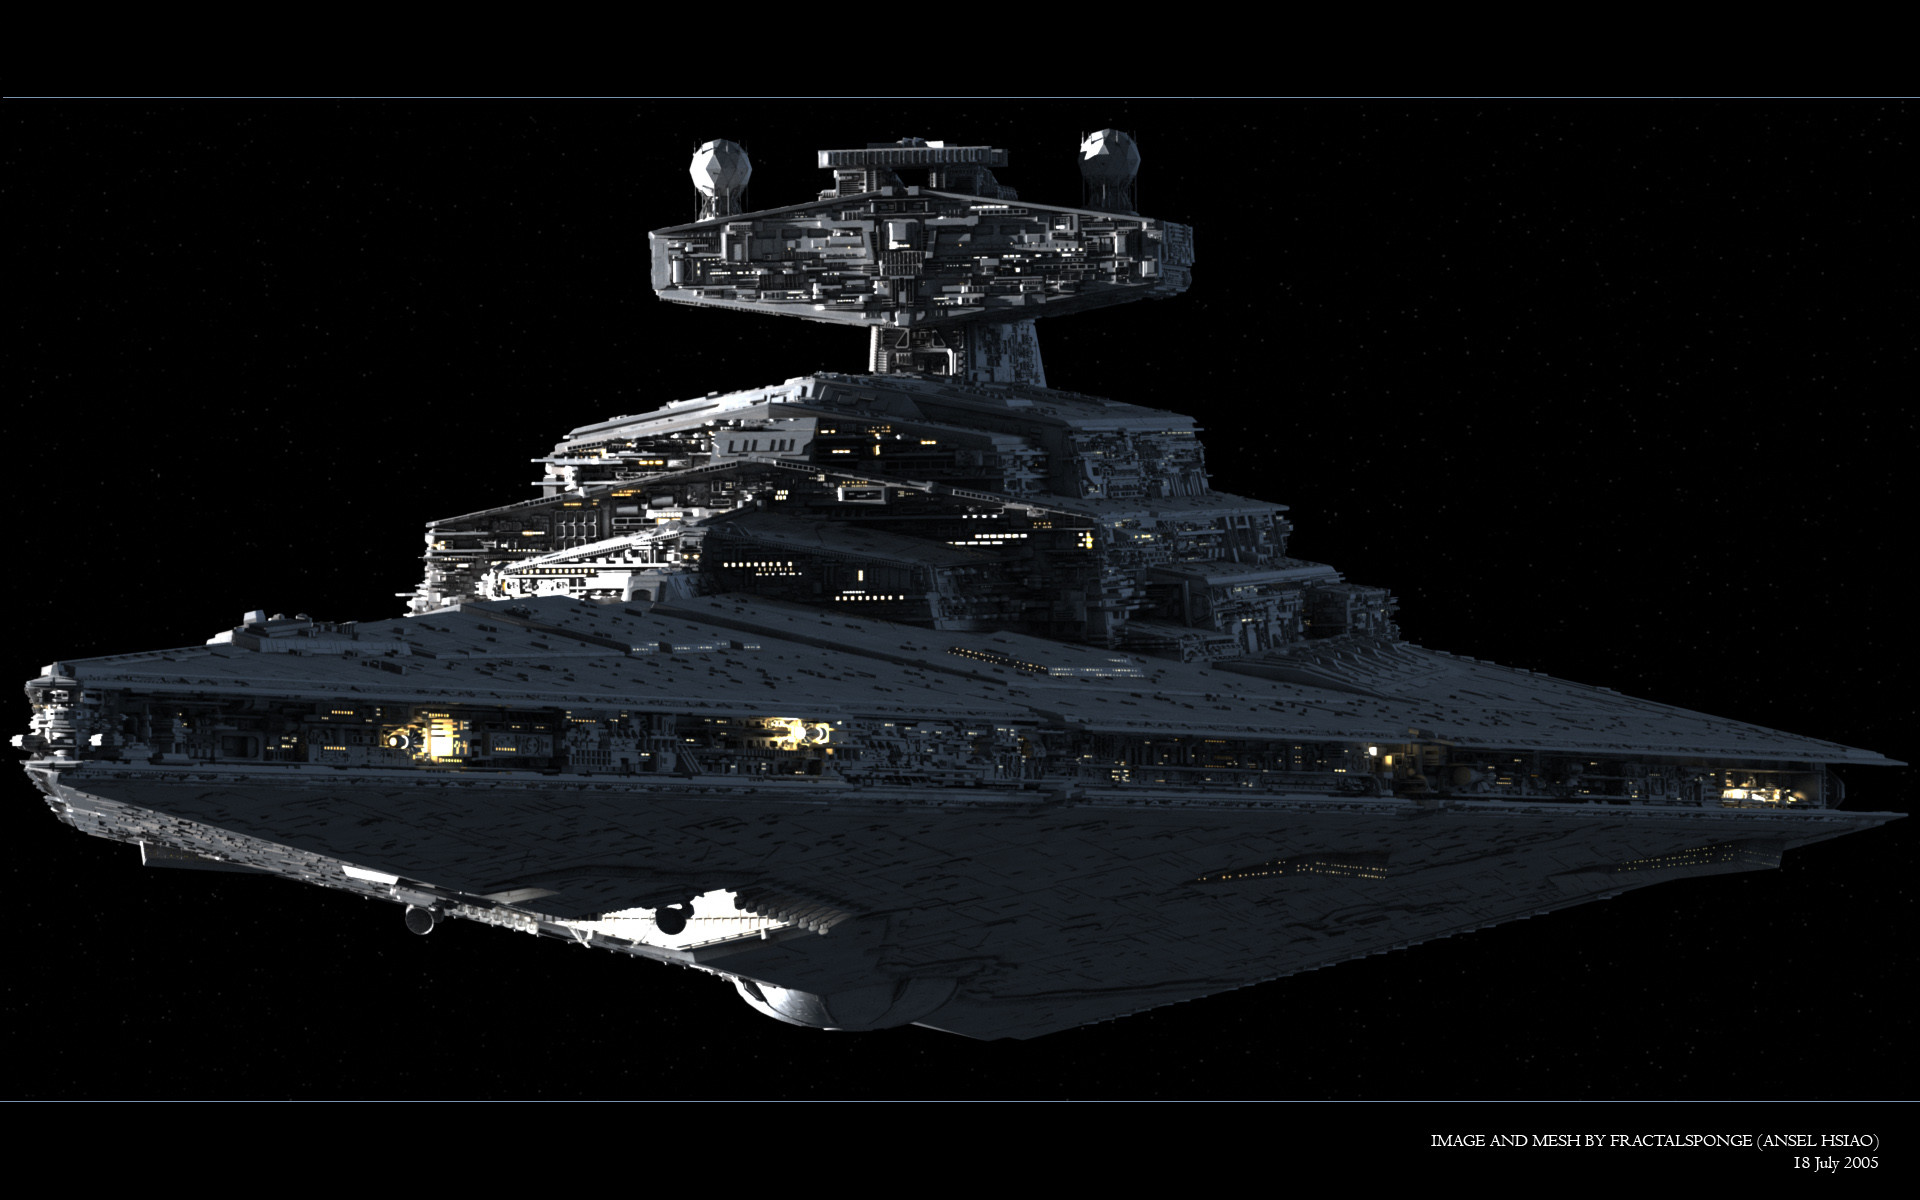 1920x1200 The Imperial War Machine by Ansel Hsiao